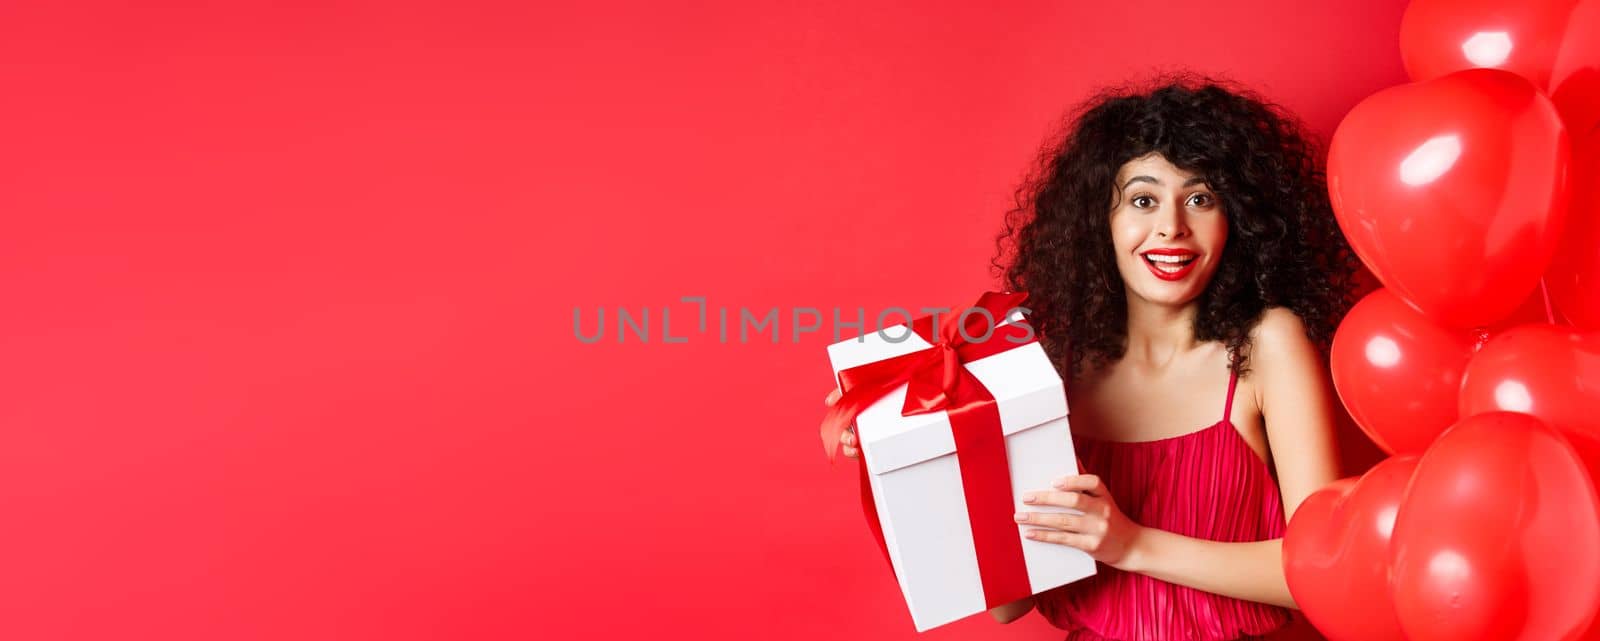 Holidays and celebration. Beautiful woman with curly hair, standing near heart balloons, holding gift box and smiling happy, white background.